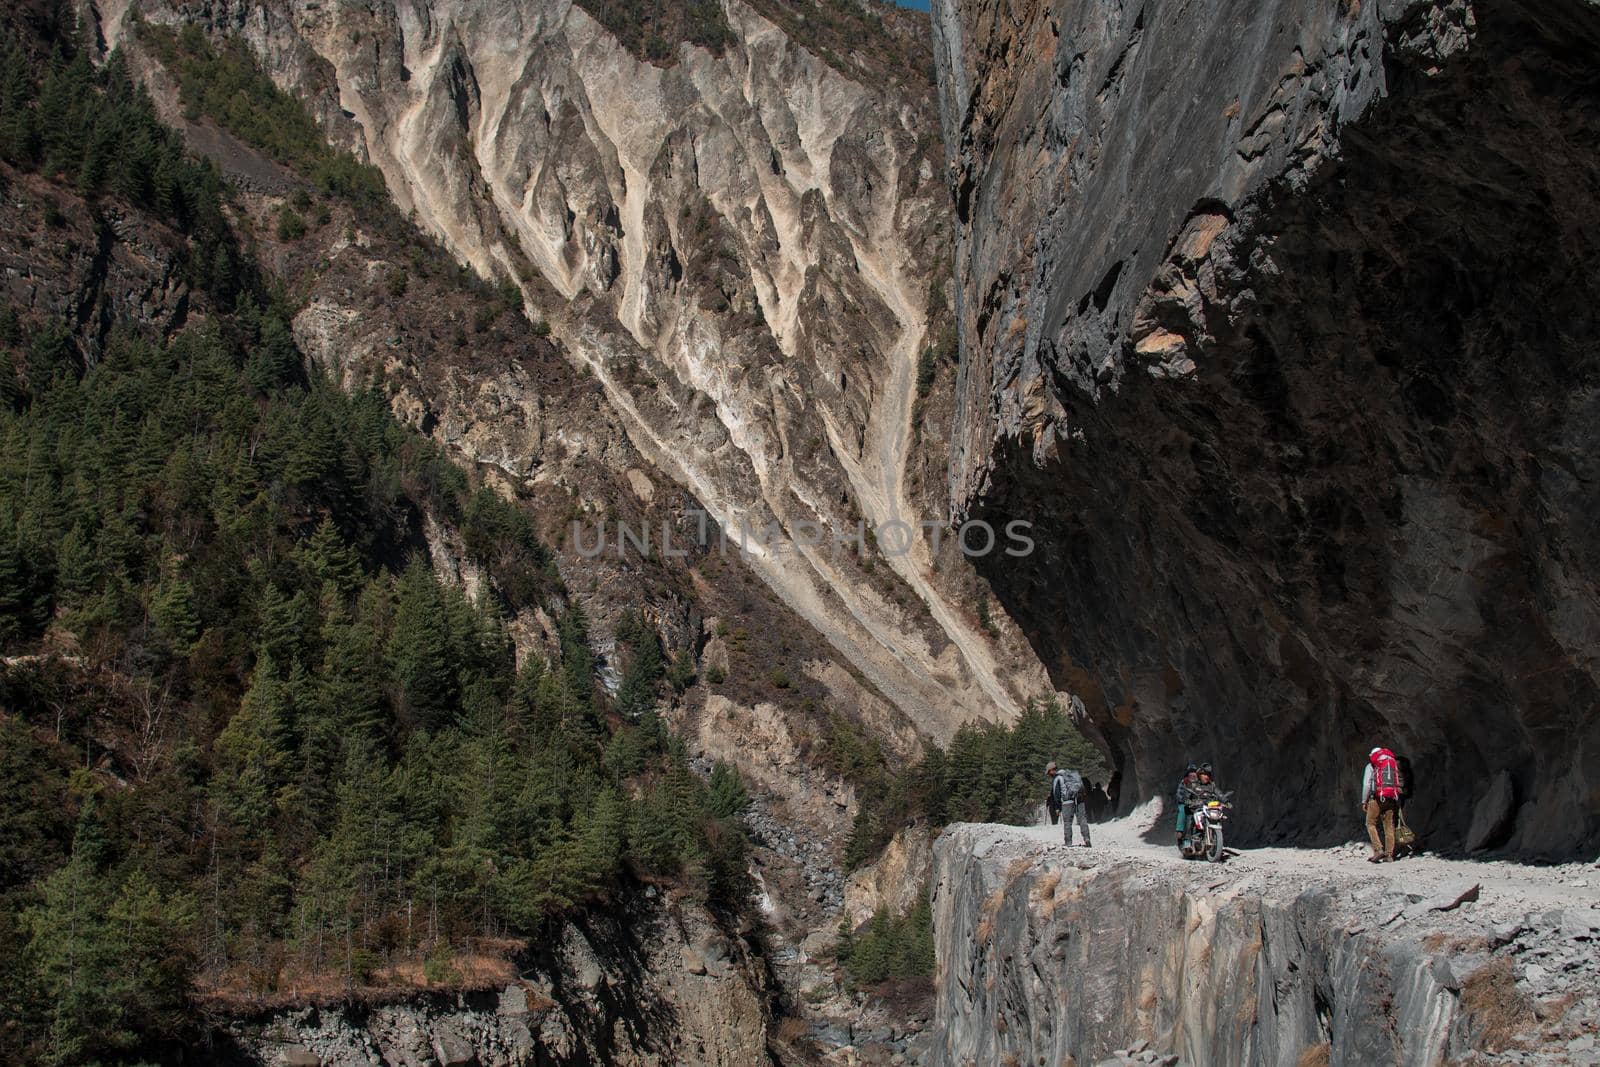 Trekking Annapurna circuit, steep edge cliff down to Marshyangdi river by arvidnorberg